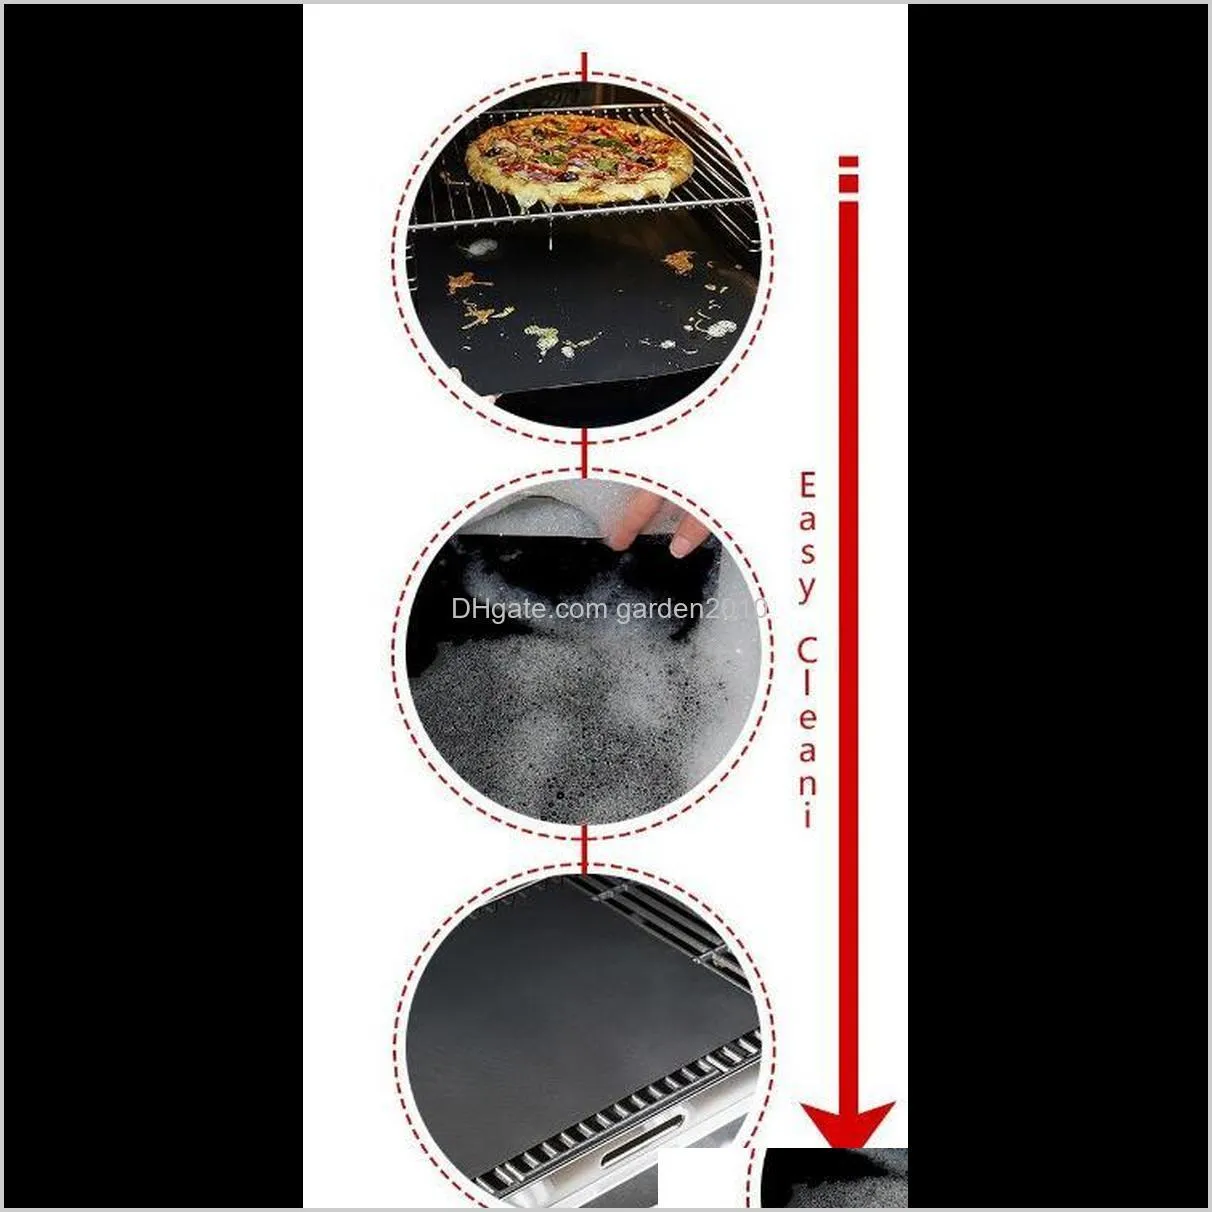 barbecue grilling liner bbq copper grill mat portable and reusable make easy 33*40cm black oven mats